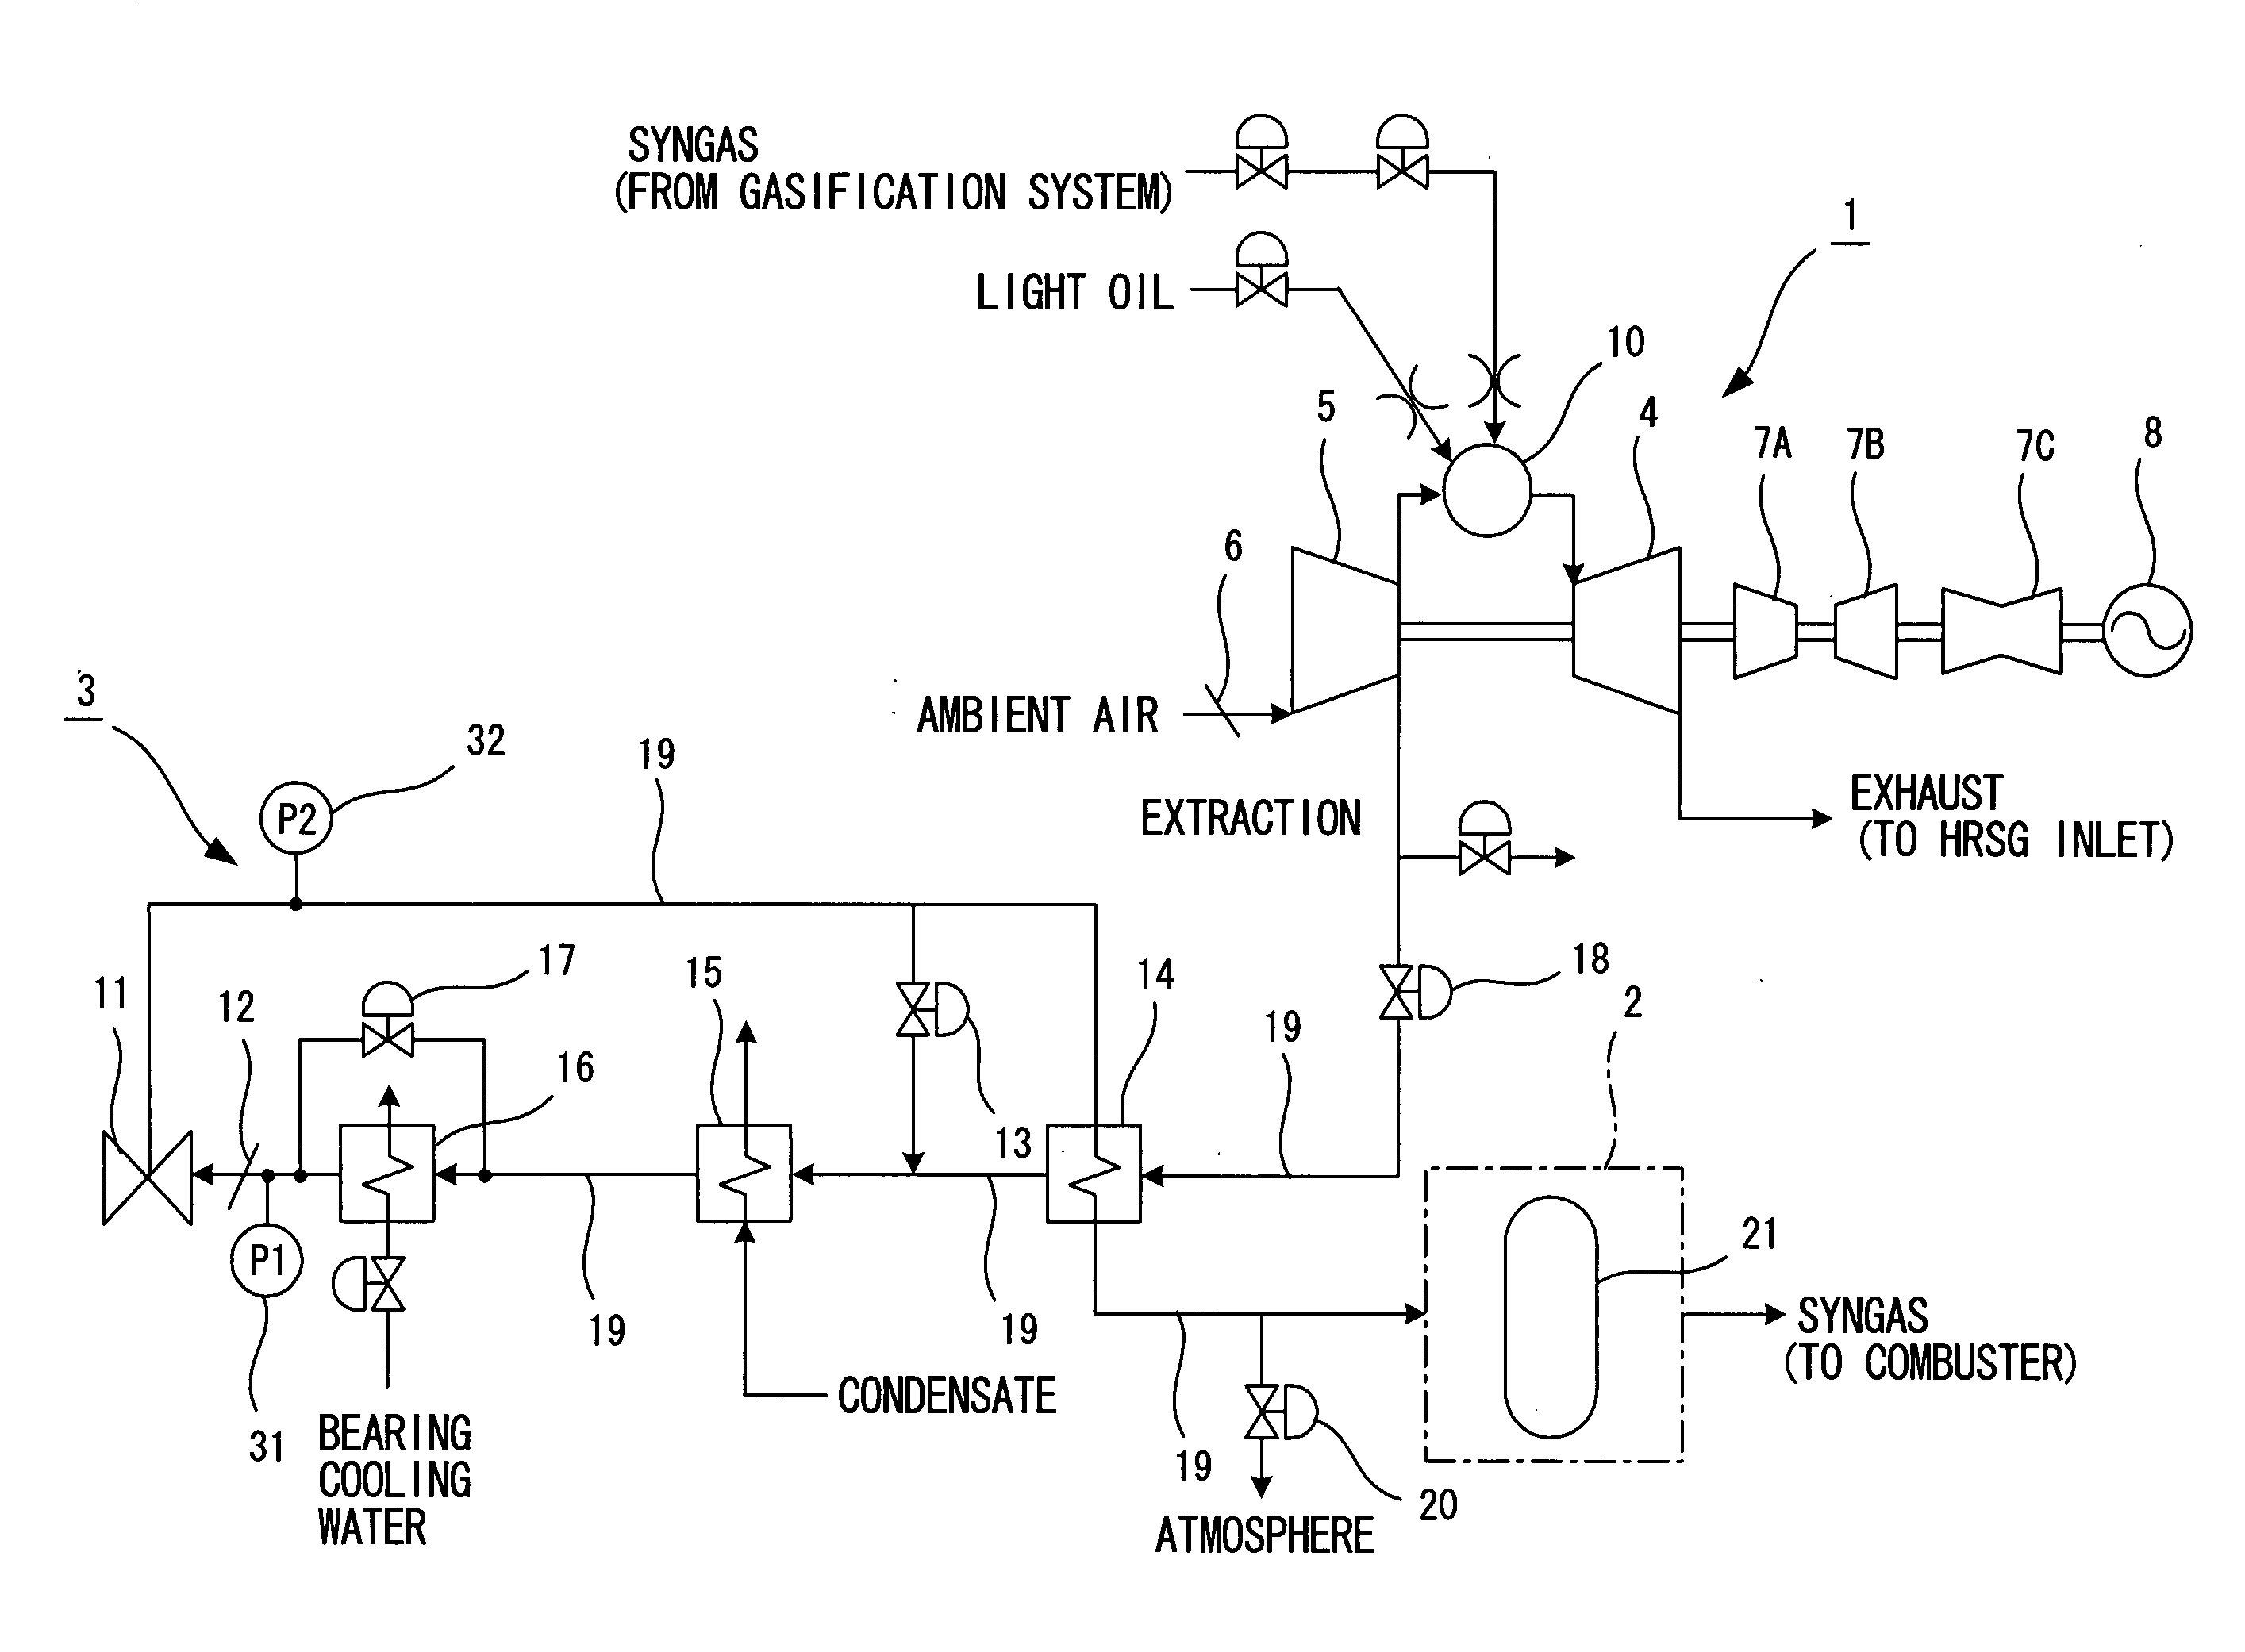 Control apparatus of extracted air booster system of integrated gasification combined cycle power plant